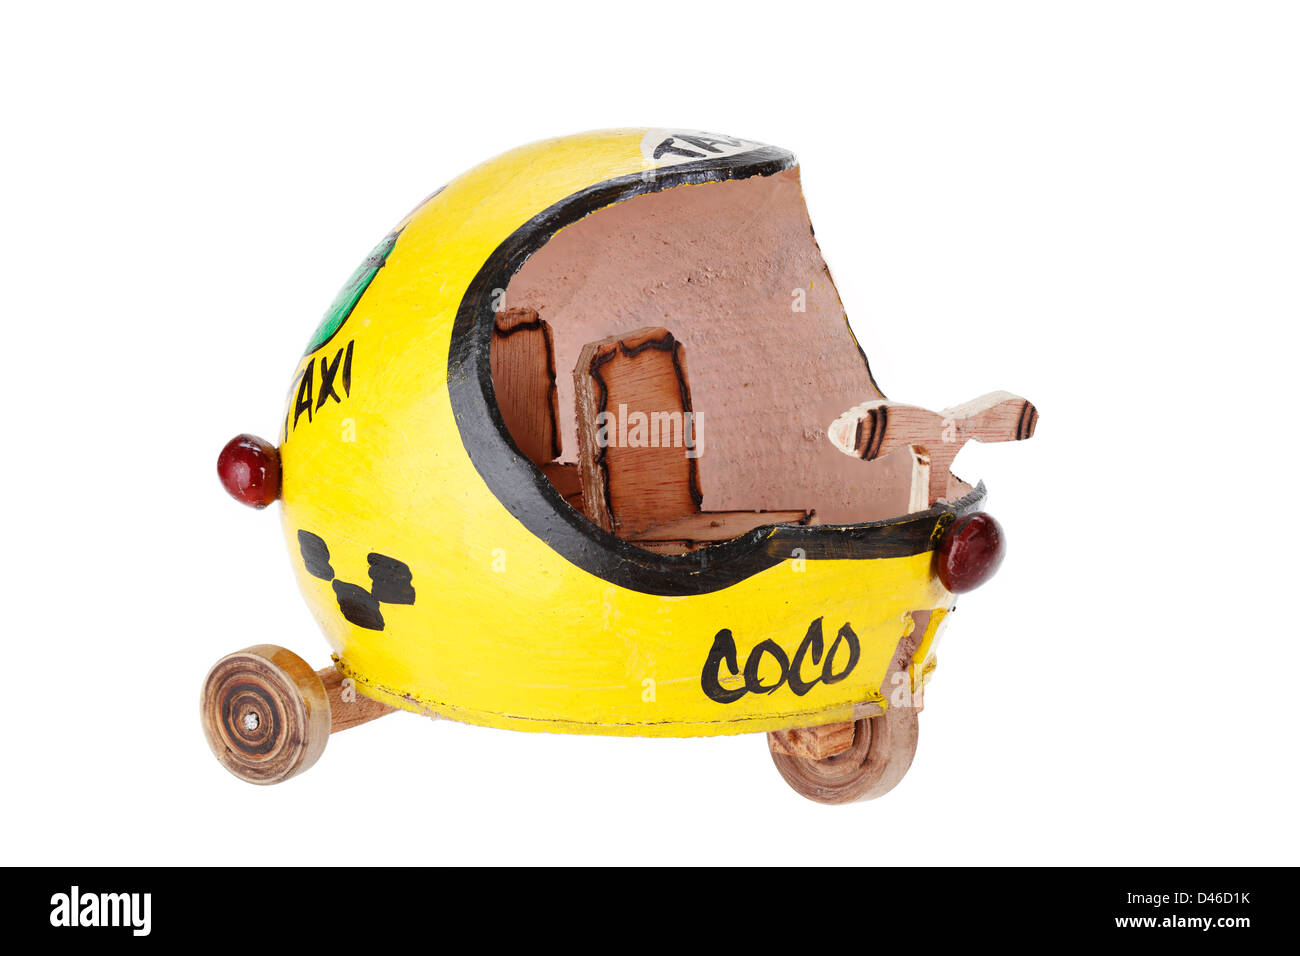 Model Toy Of A Cuban Three Wheeled Coco Taxi, A Modified Motorcycle That Can Carry Three Passengers Stock Photo